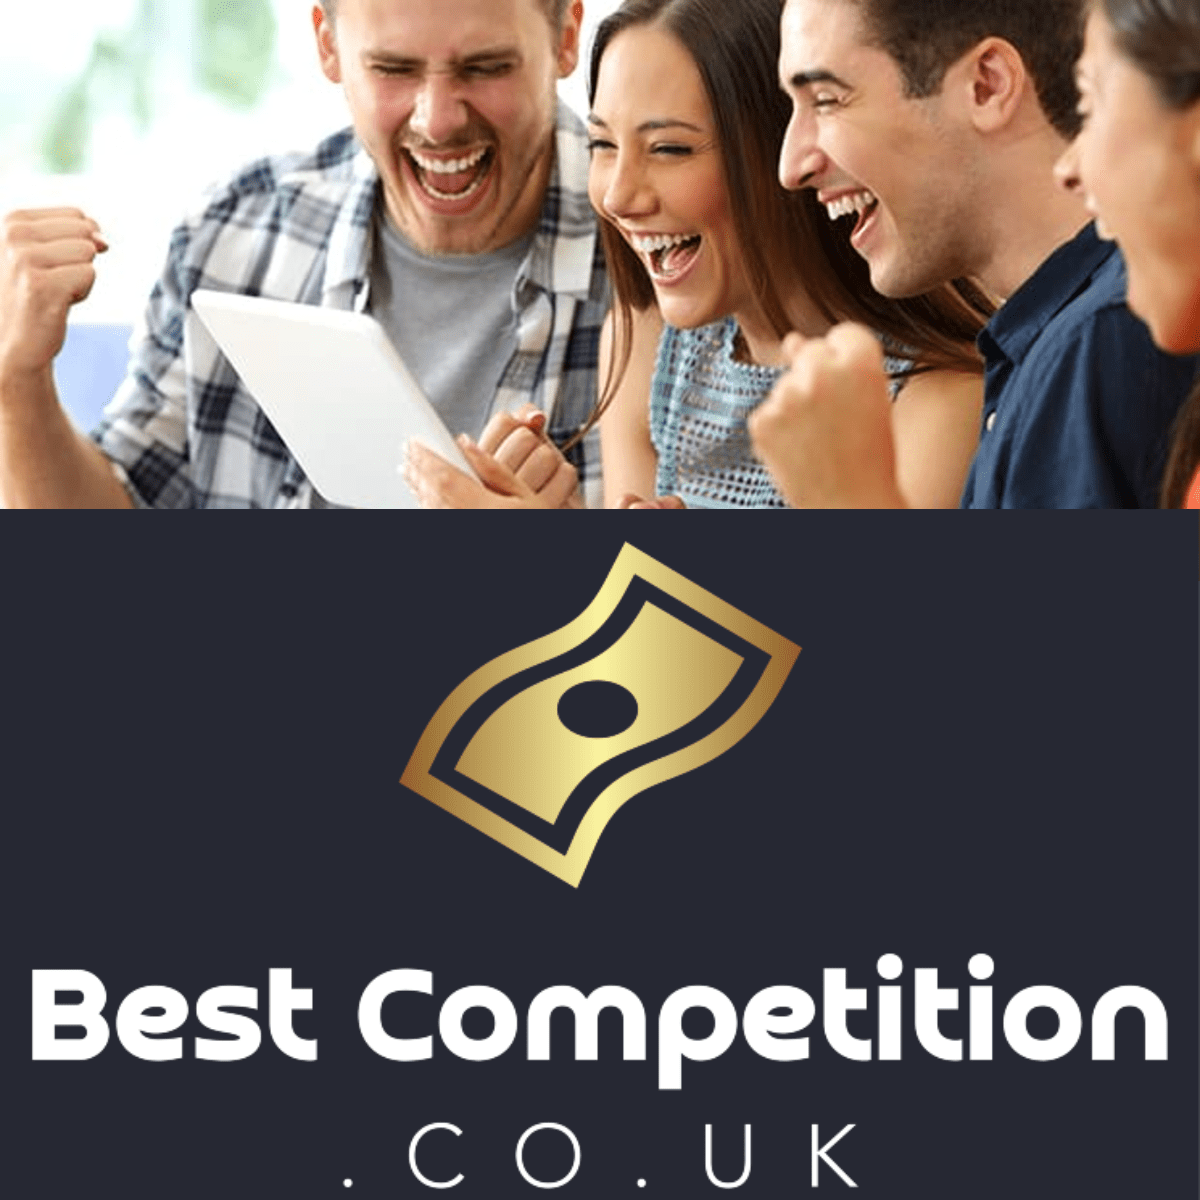 UK prize draw competition to win £500 with only 2 tickets for sale! Enter this prize draw today for £315 per ticket, buy up to 1 ticket (limit per customer). https://www.bestcompetition.co.uk/